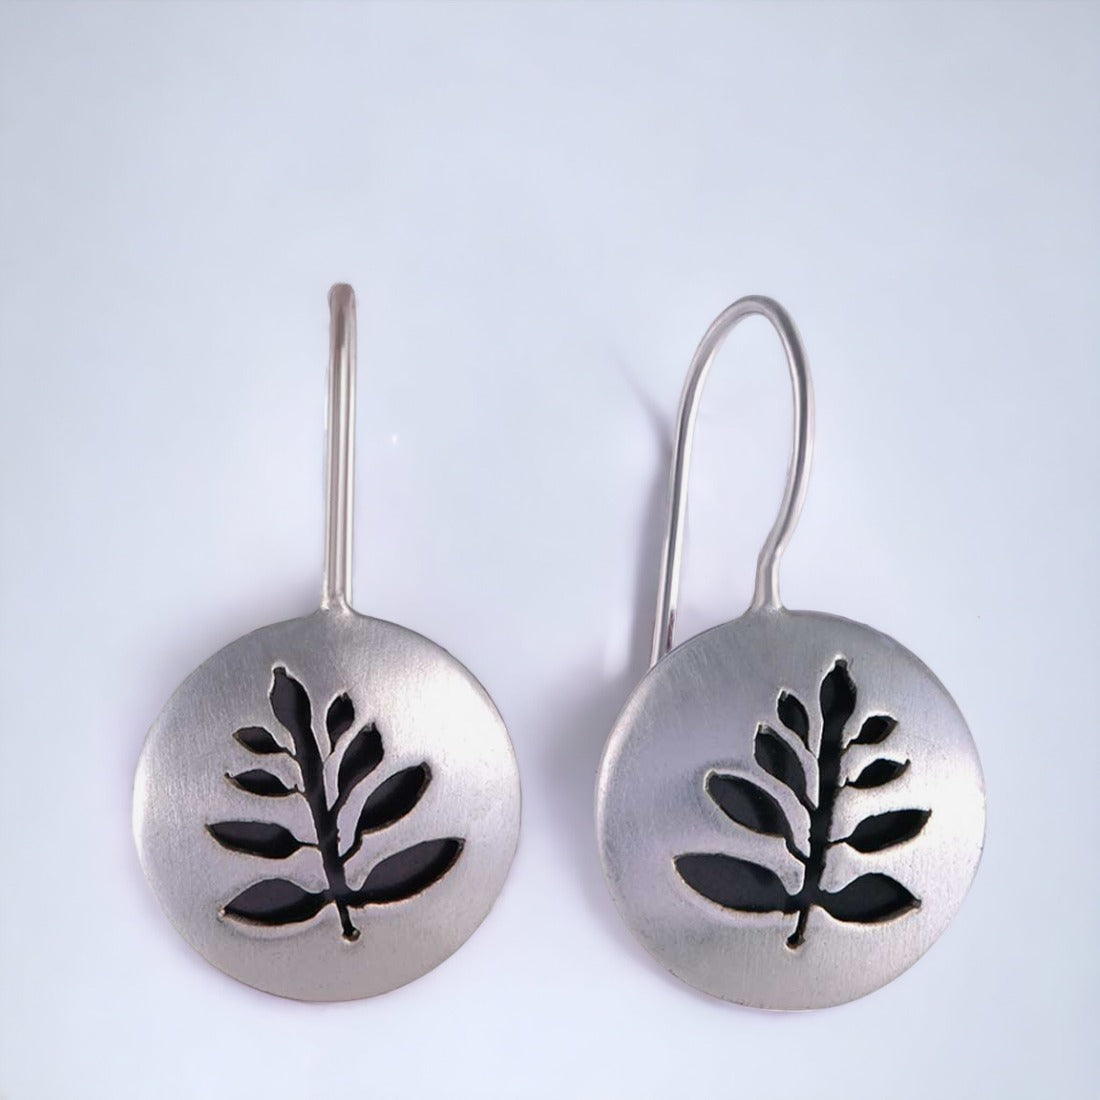 Round Leaf Engraved Pendant With Earring Set